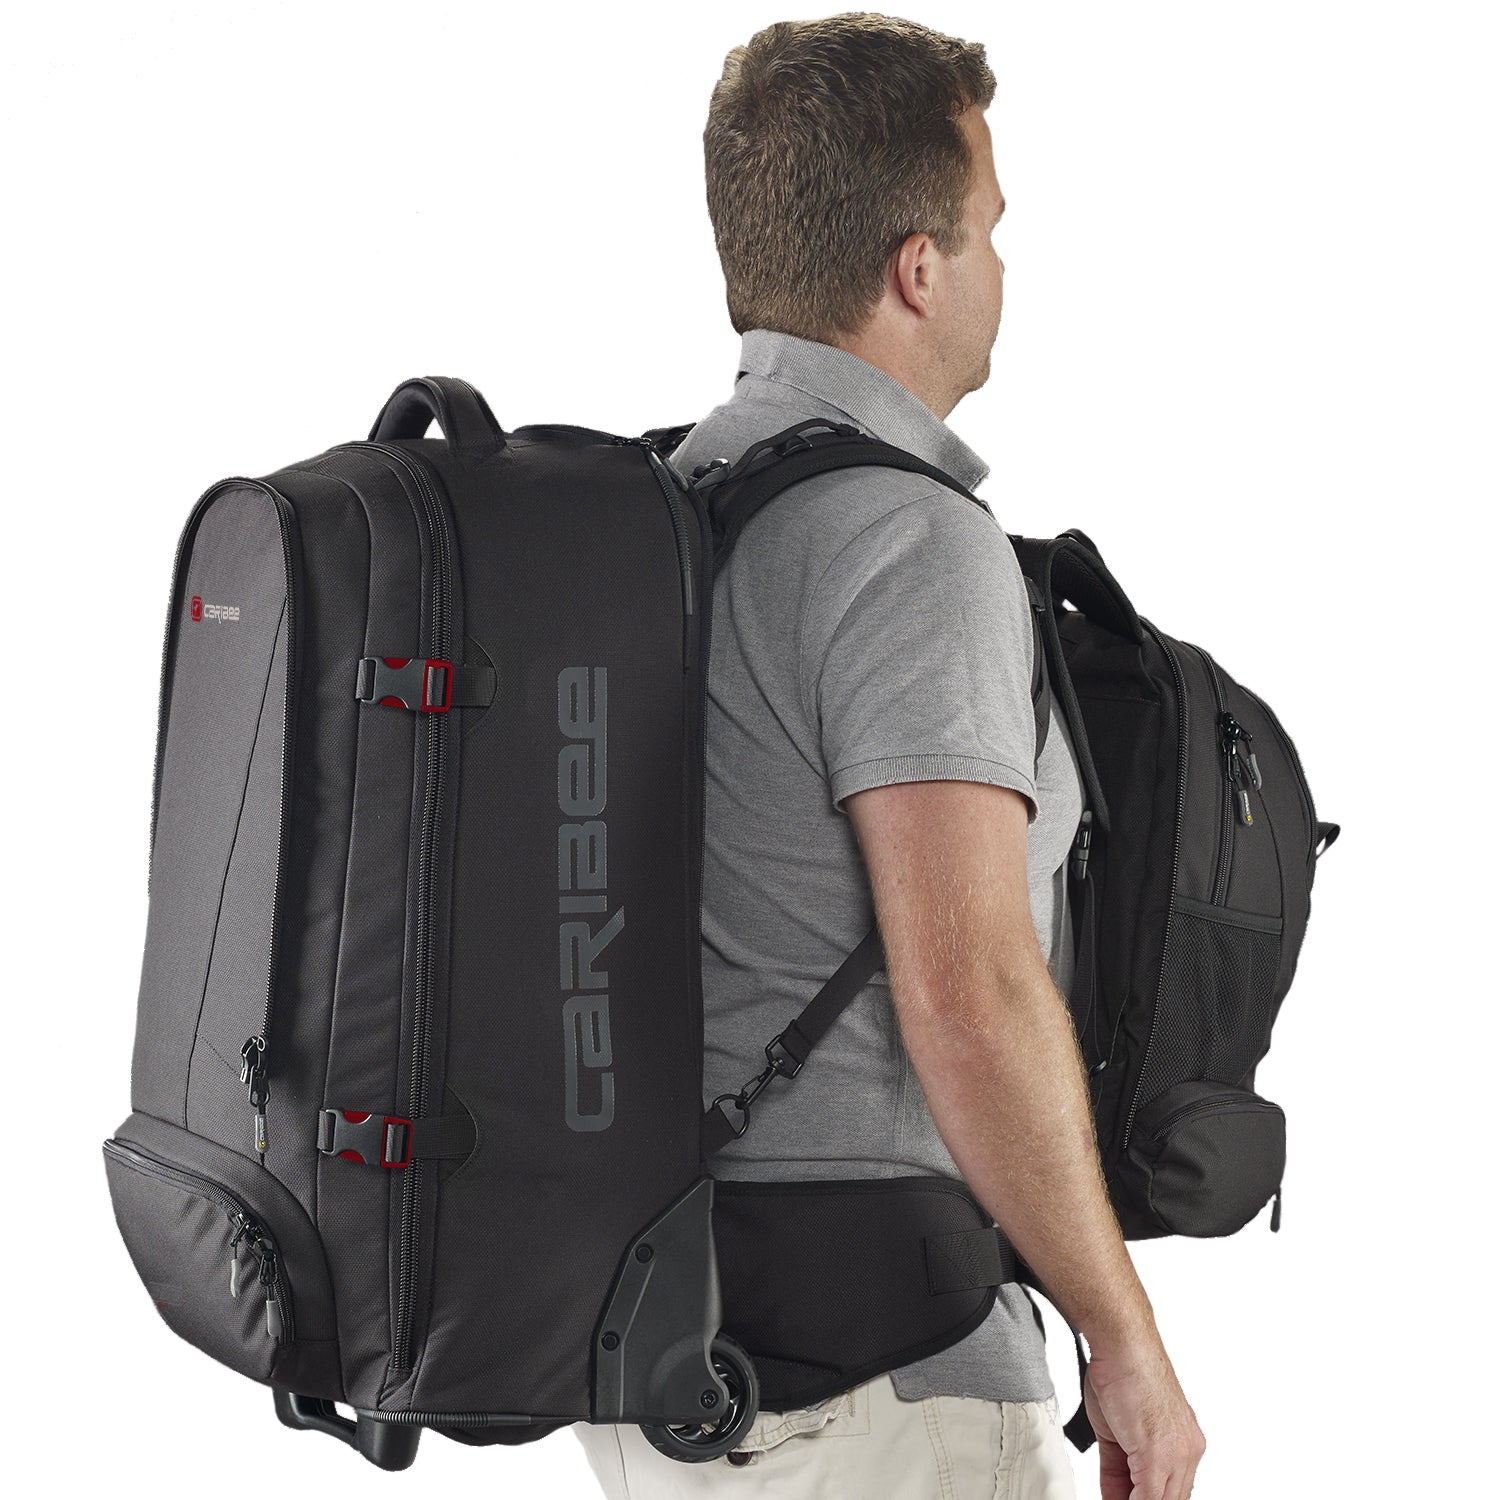 Caribee Sky Master 80L III wheel travel backpack with daypack attached to main harness